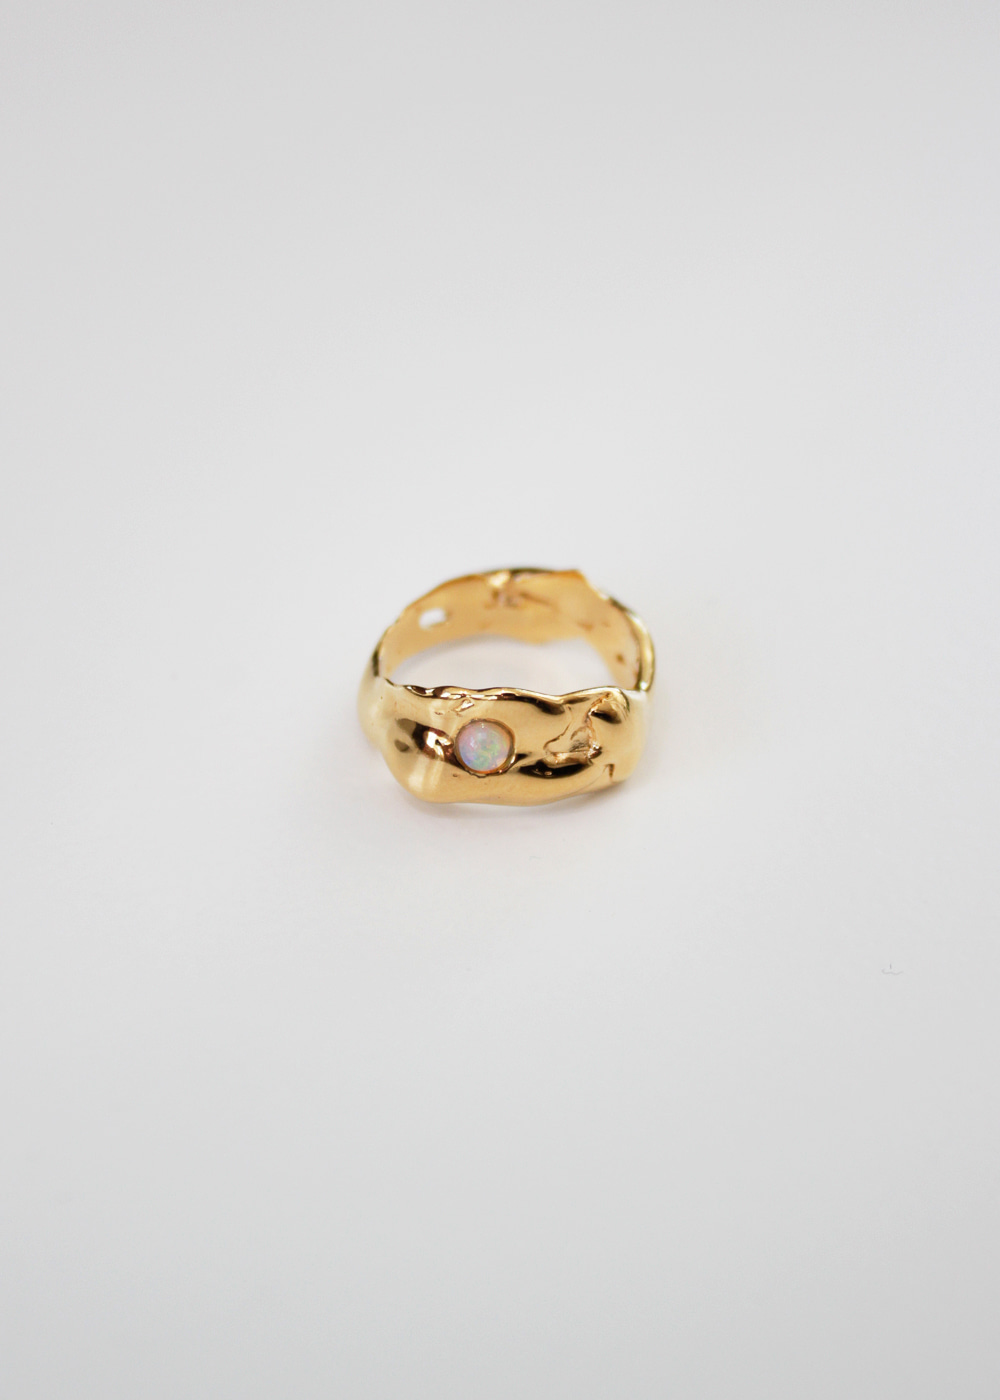 DEW DROP RING IN GOLD